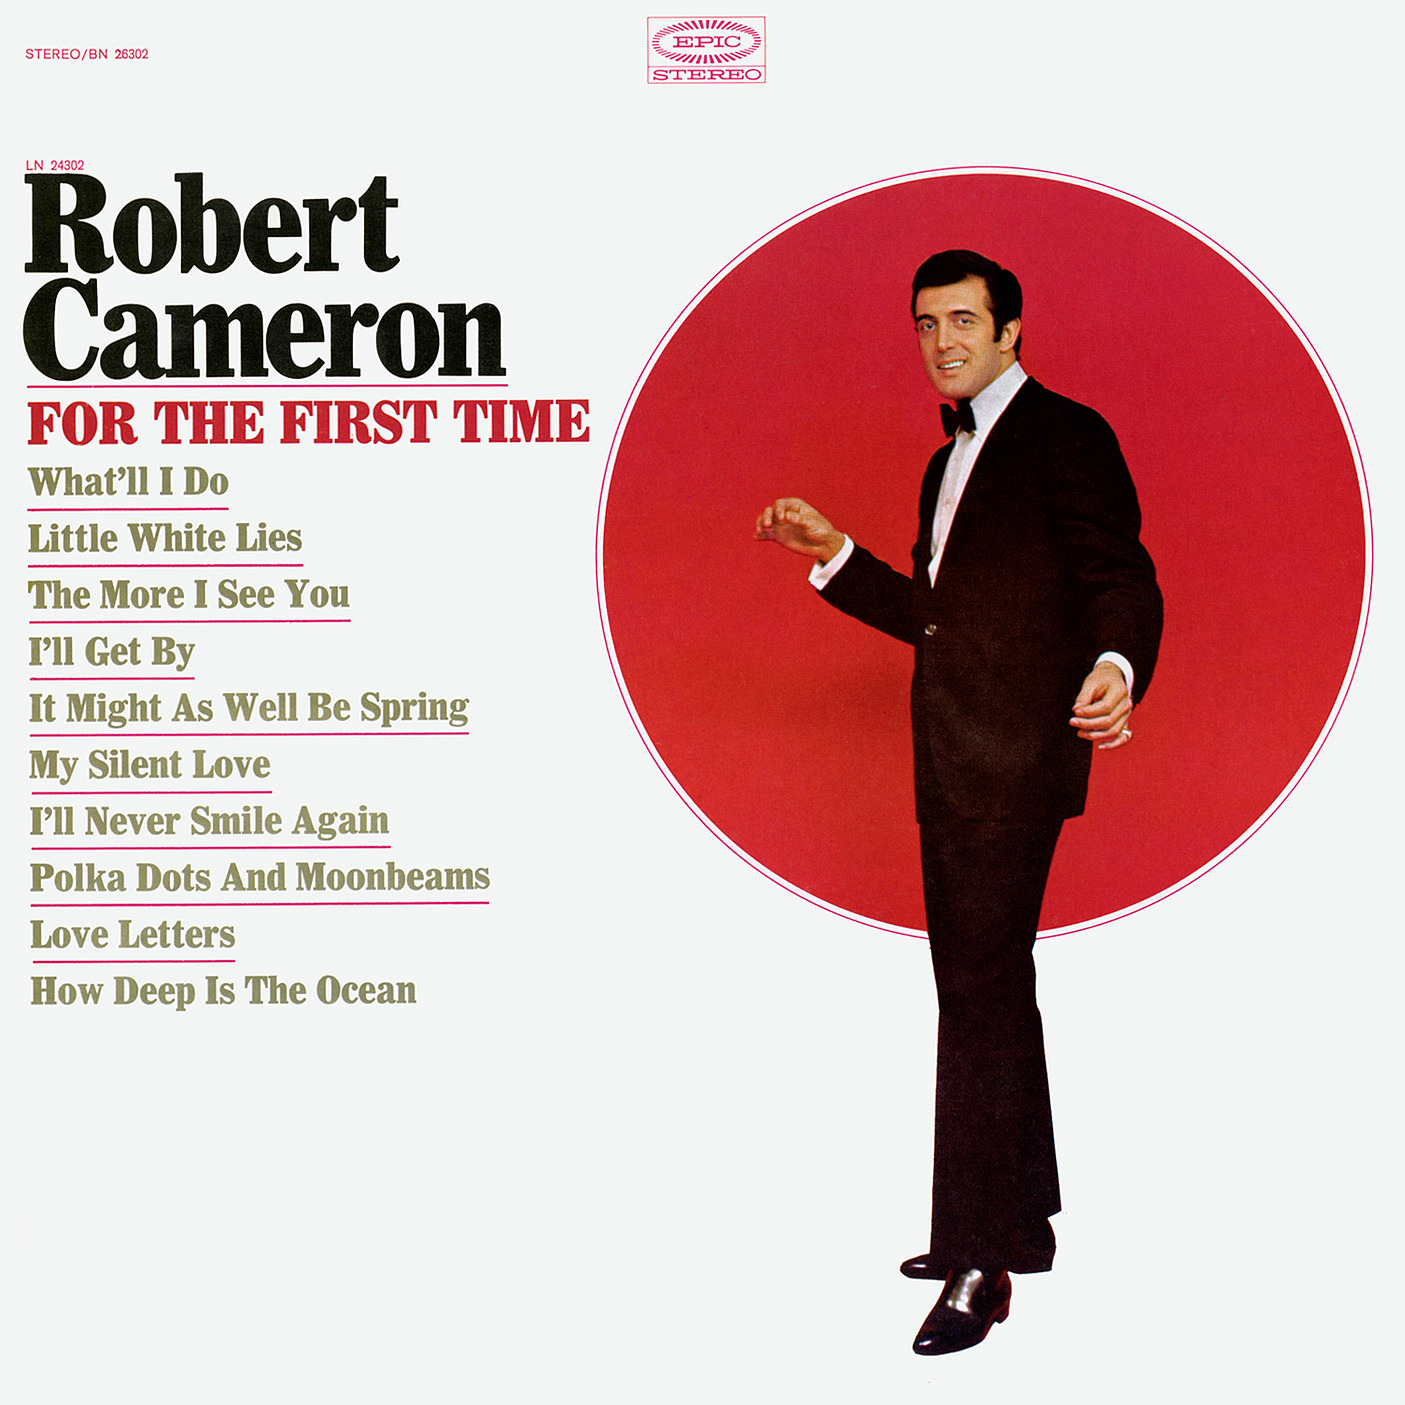 Robert Cameron - For The First Time (1967/2017) [AcousticSounds FLAC 24bit/192kHz]